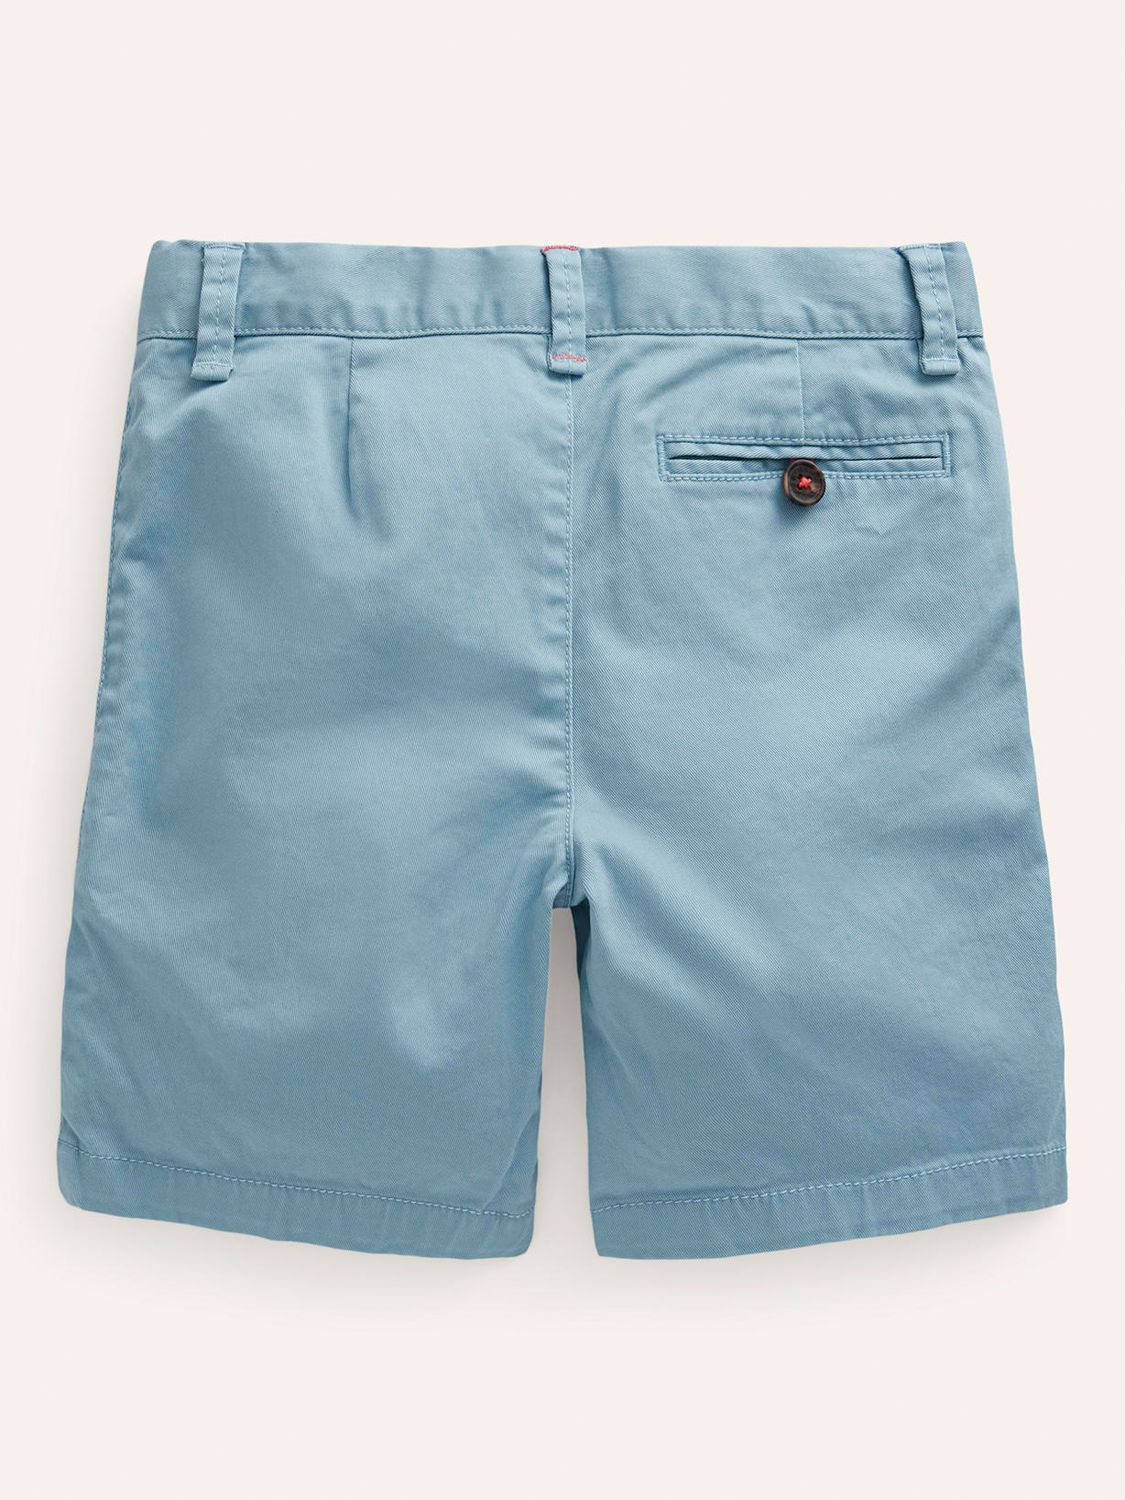 Buy Mini Boden Kids' Classic Chino Shorts, Duck Egg Blue Online at johnlewis.com